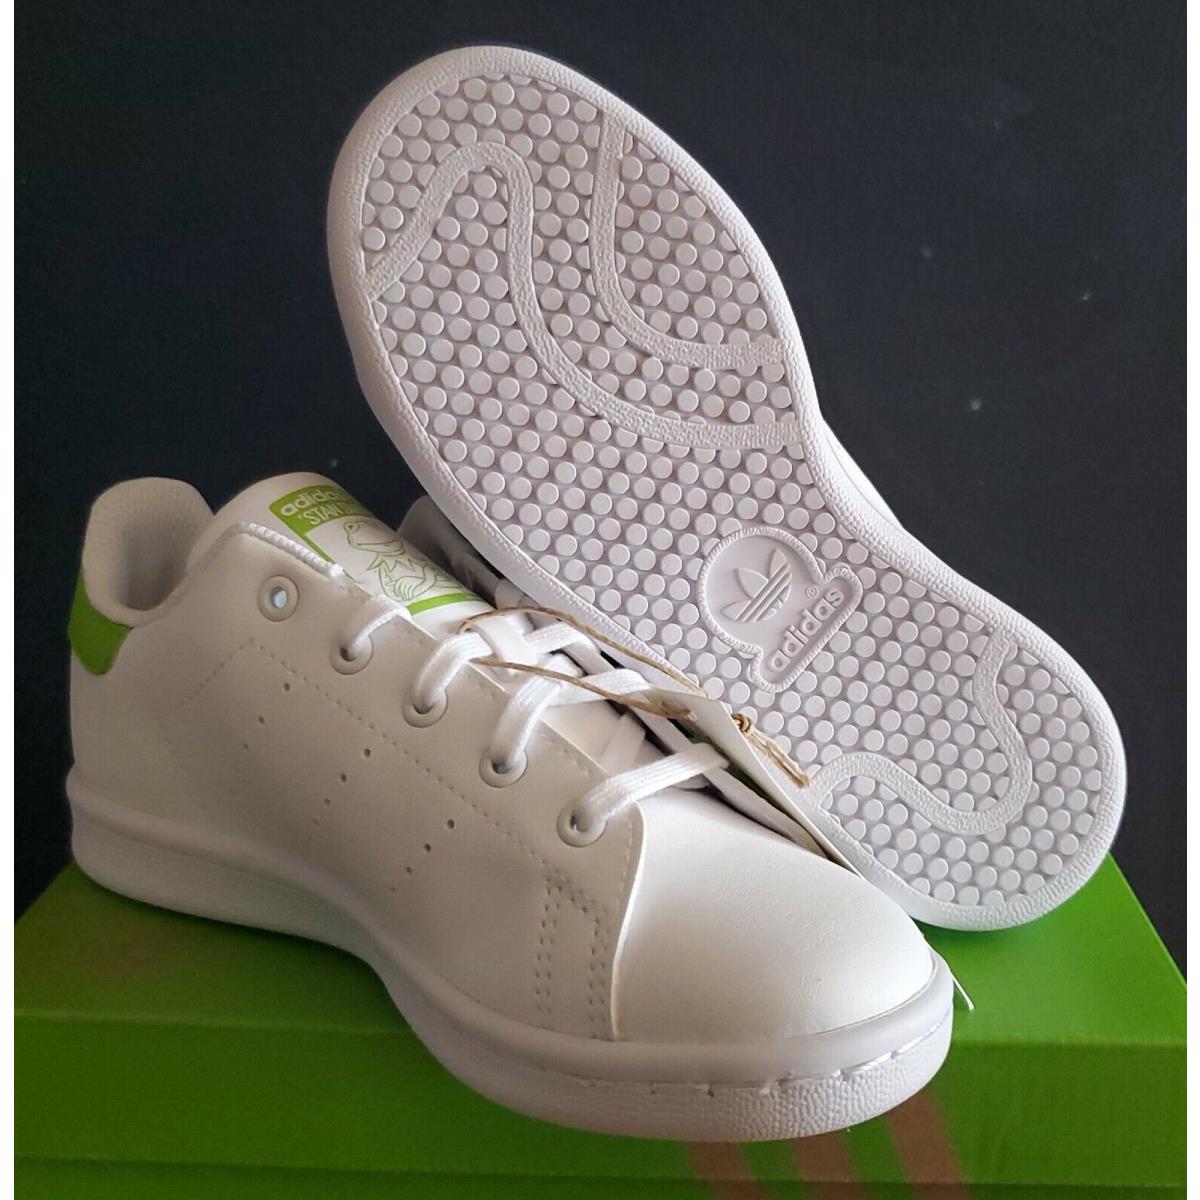 Adidas shoes THE MUPPETS - Footwear white/Pantone 0